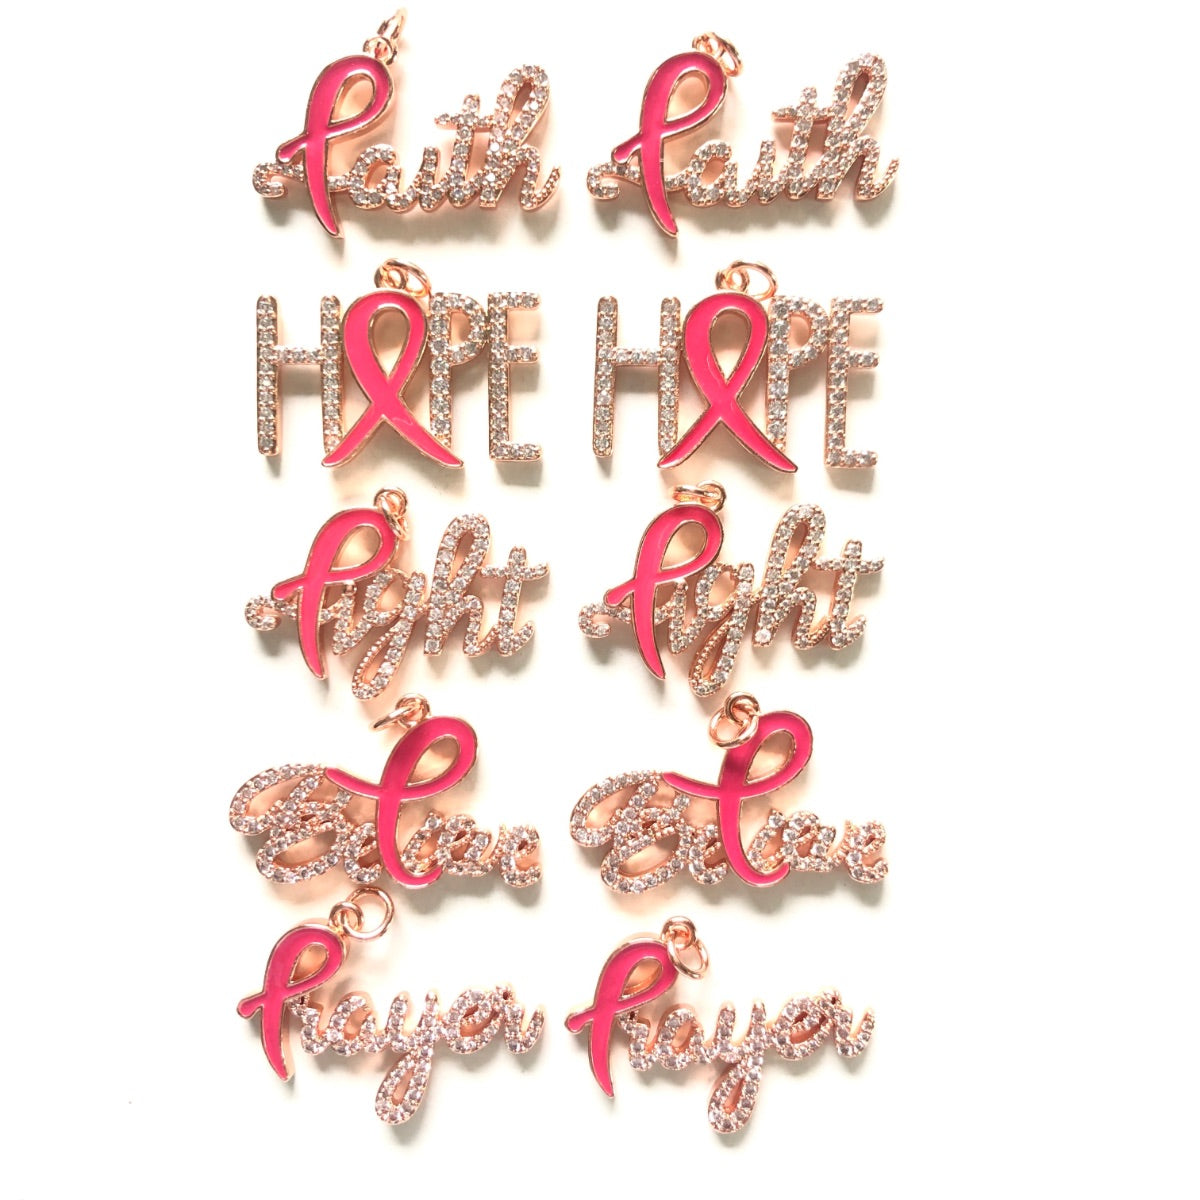 10pcs/lot CZ Pave Pink Ribbon Faith Hope Fight Brave Prayer Breast Cancer Awareness Word Charms Bundle Rose Gold Set CZ Paved Charms Breast Cancer Awareness Mix Charms New Charms Arrivals Charms Beads Beyond